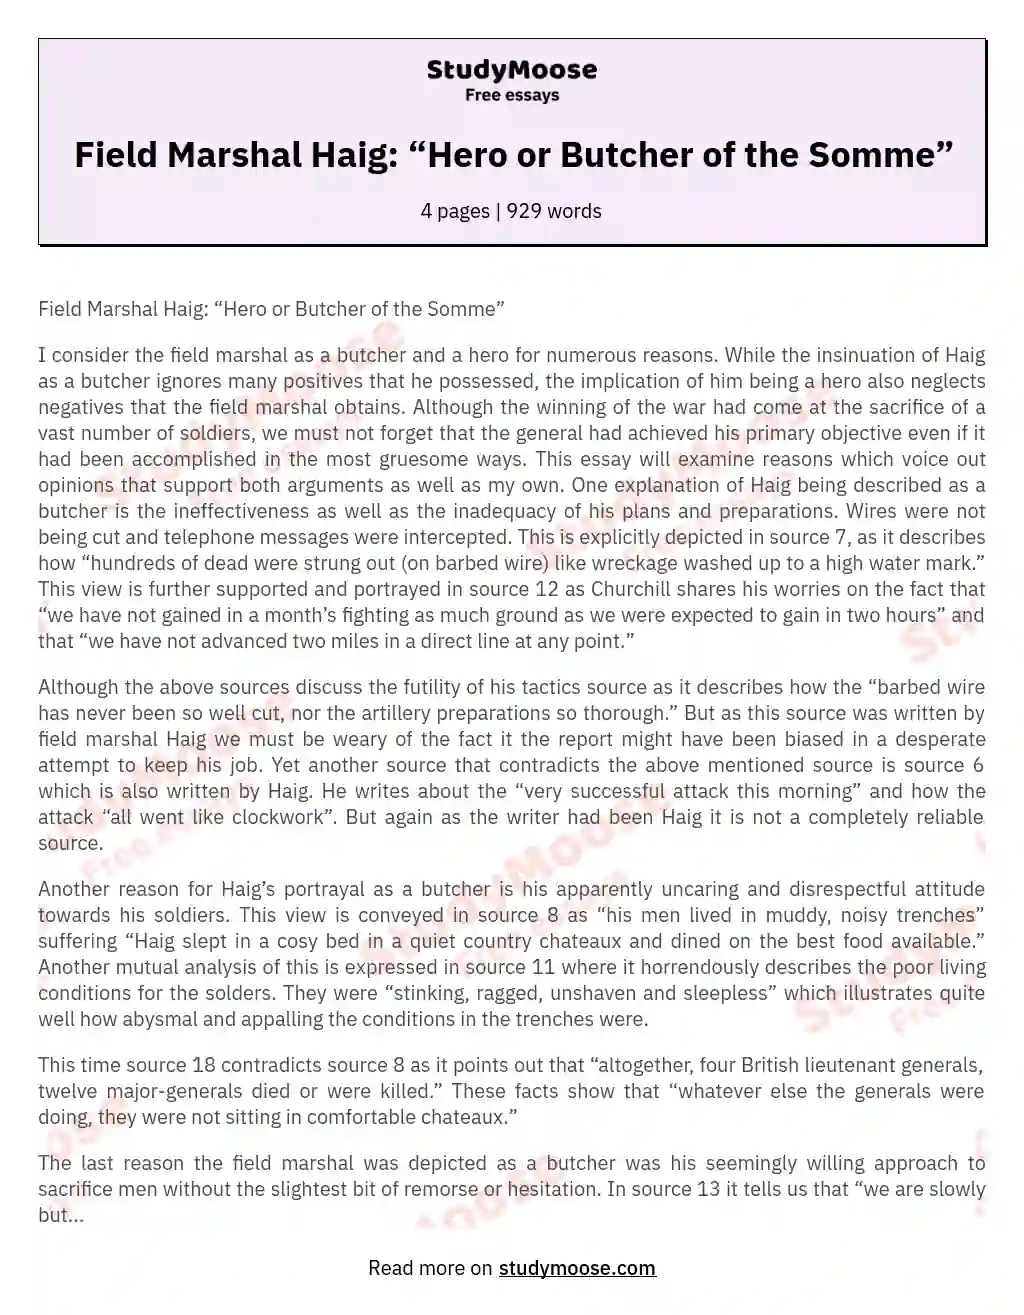 Field Marshal Haig: “Hero or Butcher of the Somme” essay